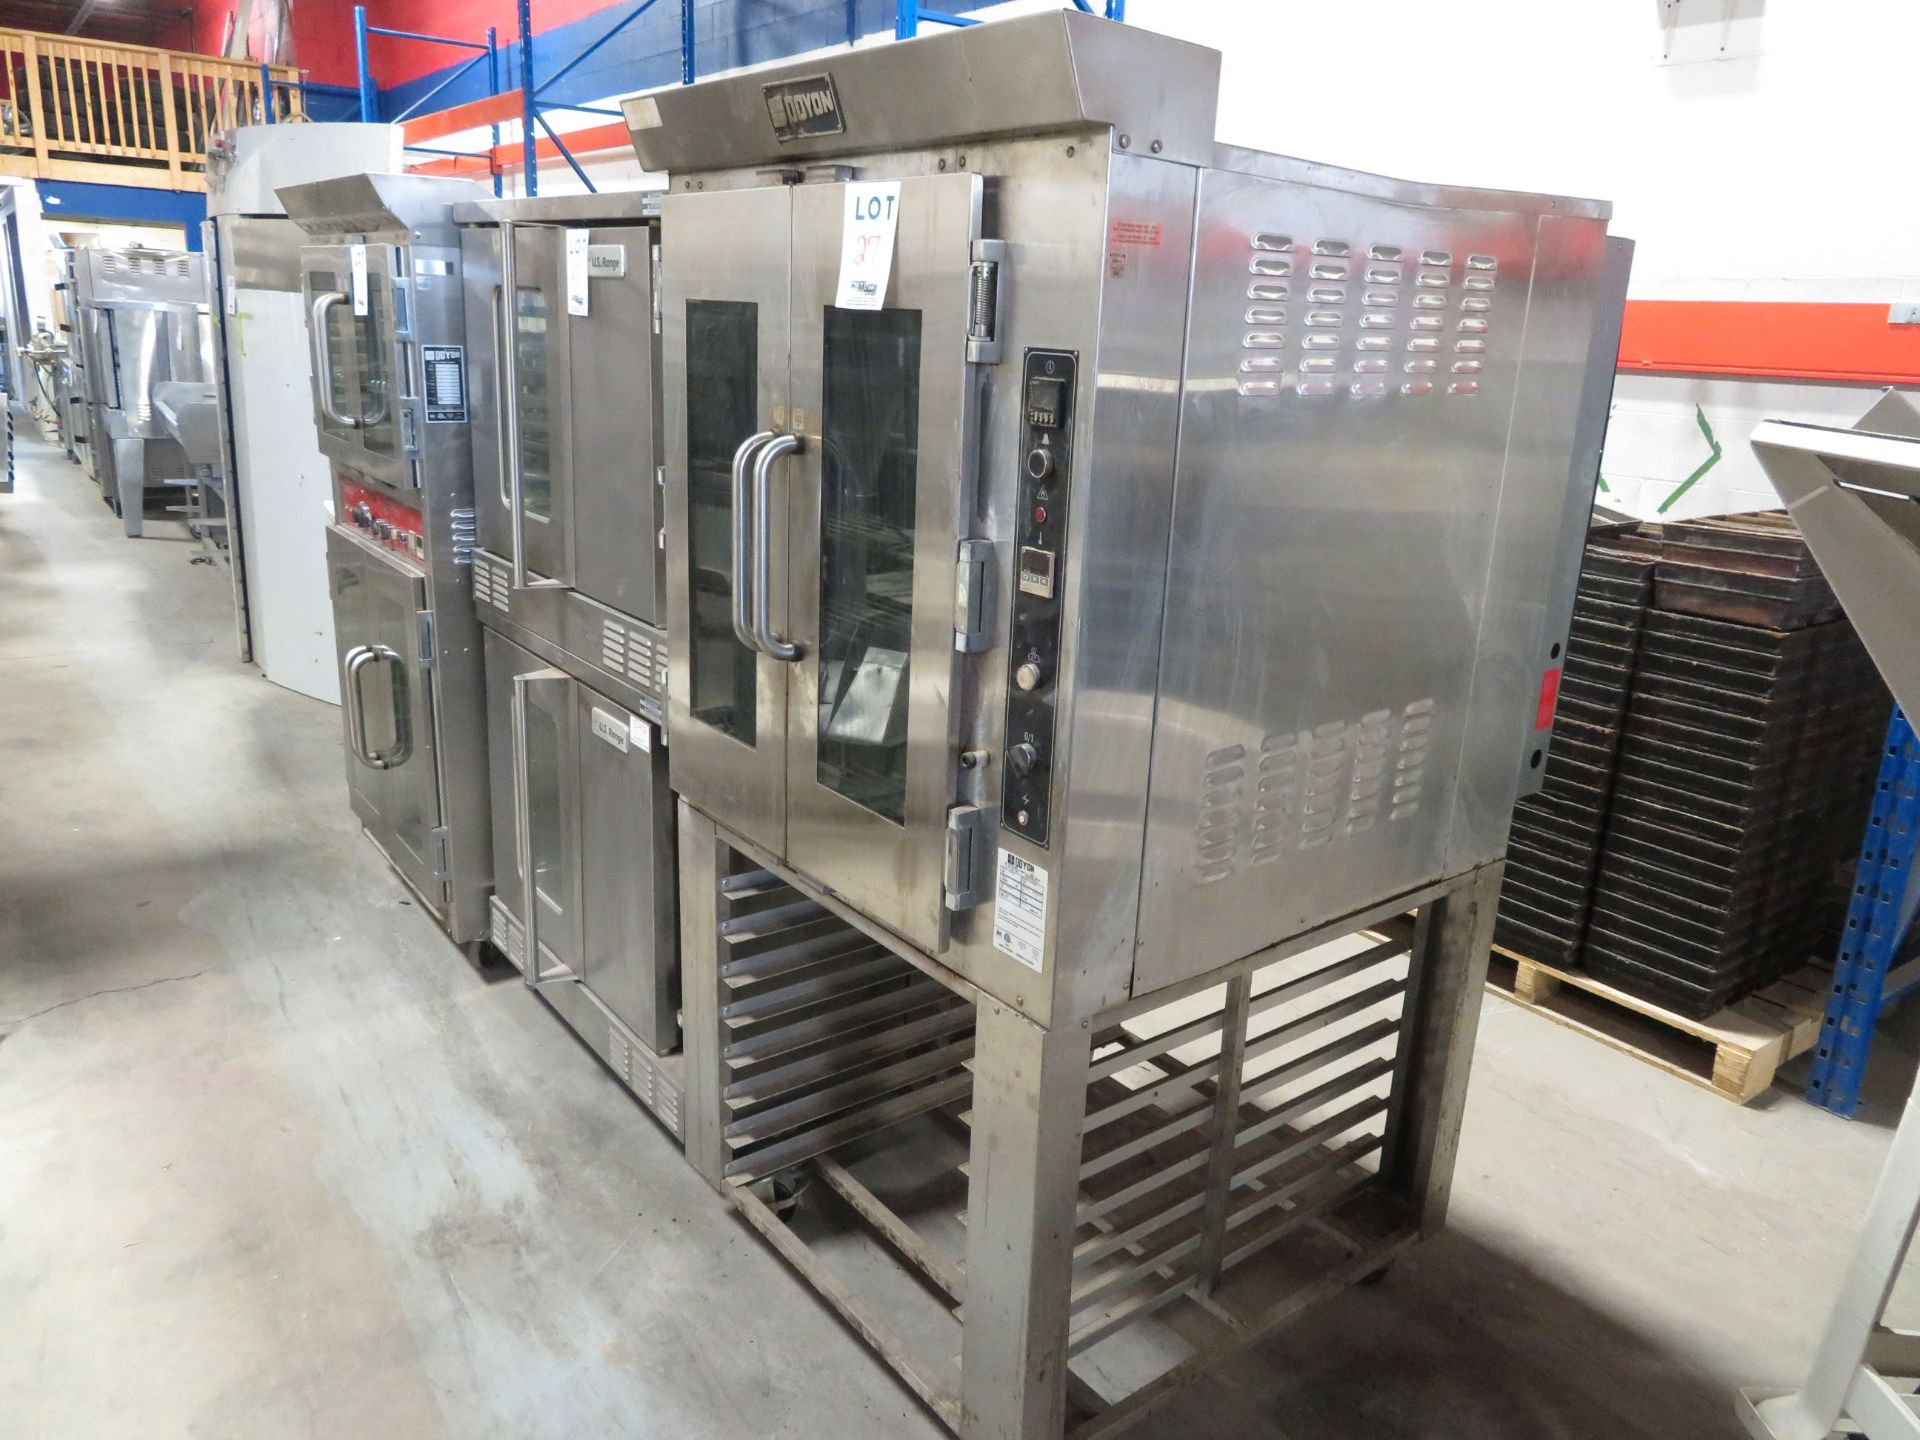 DOYON convection oven #JA8, 120/208 volt, 3 phase, approx. 37"w x 56"d x 74"h - Image 6 of 6